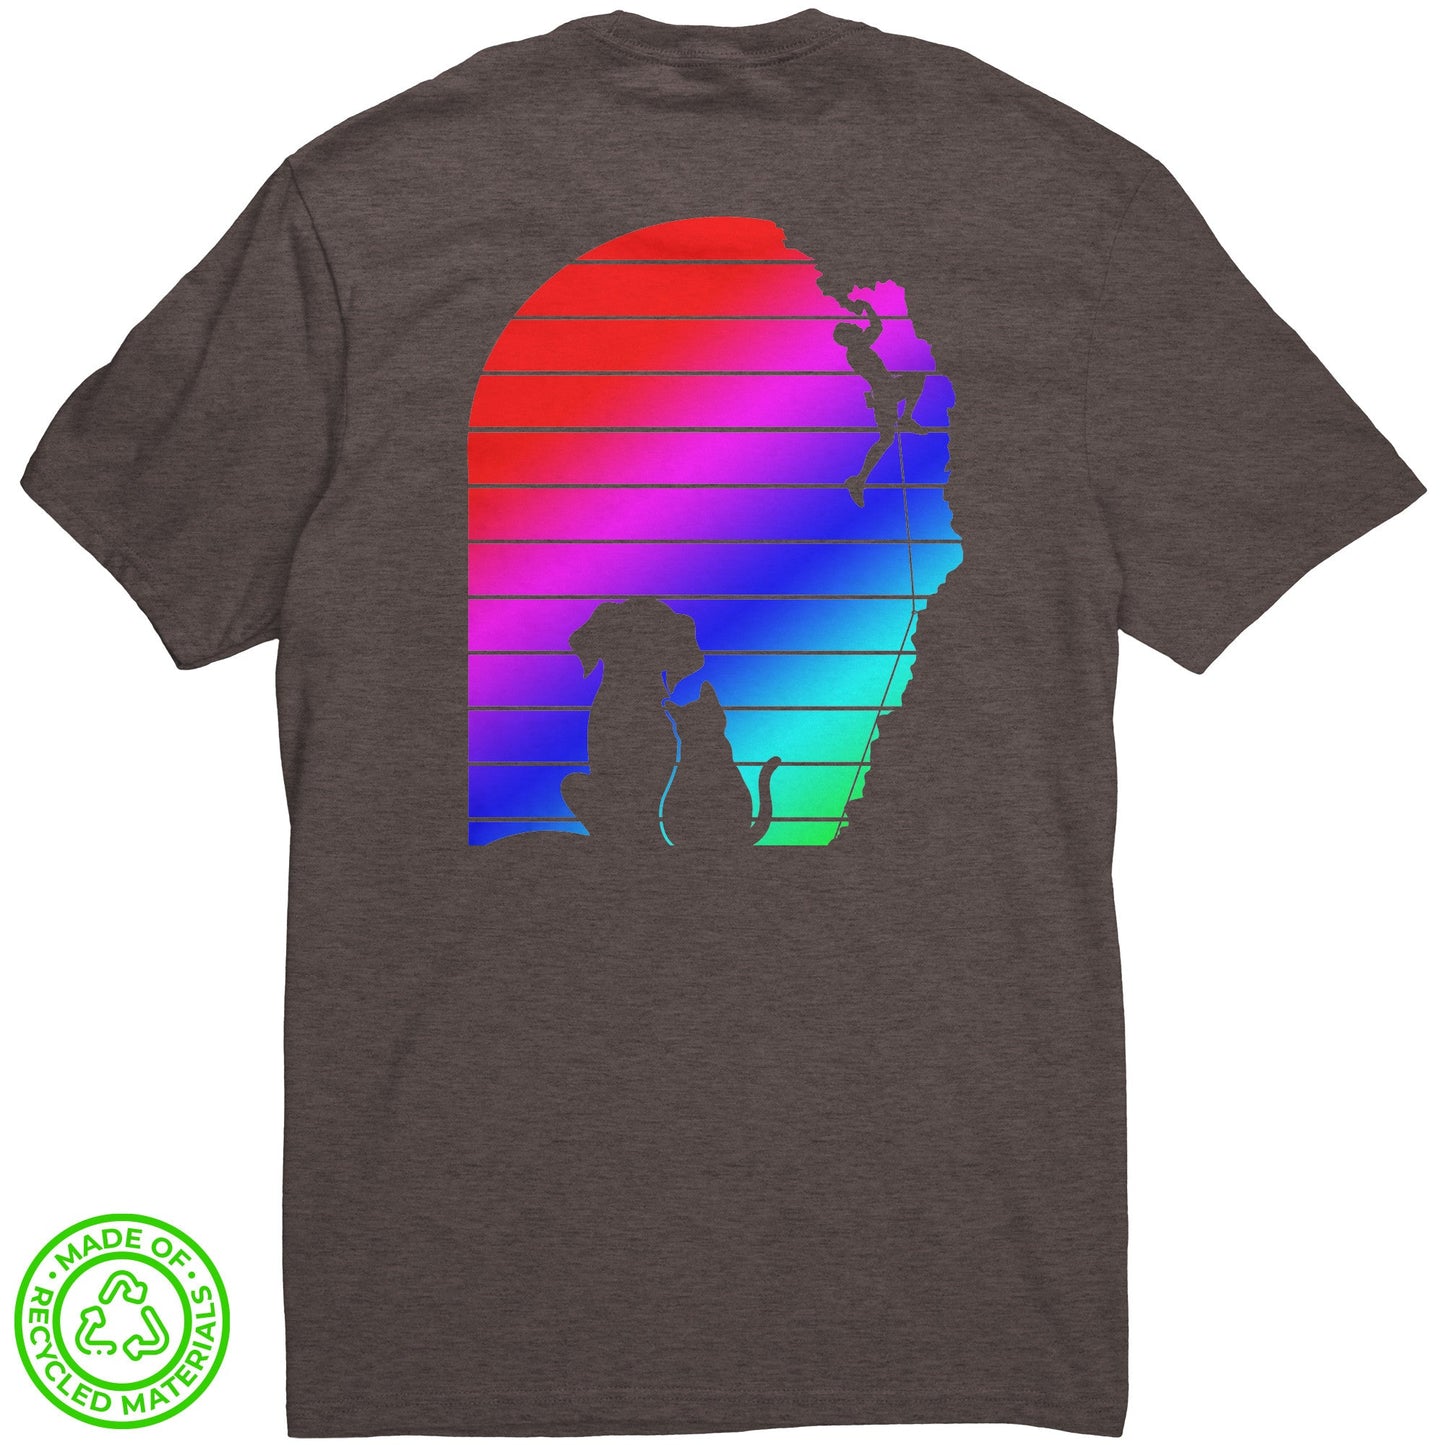 Eco-Friendly Re-Tee (Rainbow Silhouetted climber, dog, and cat)